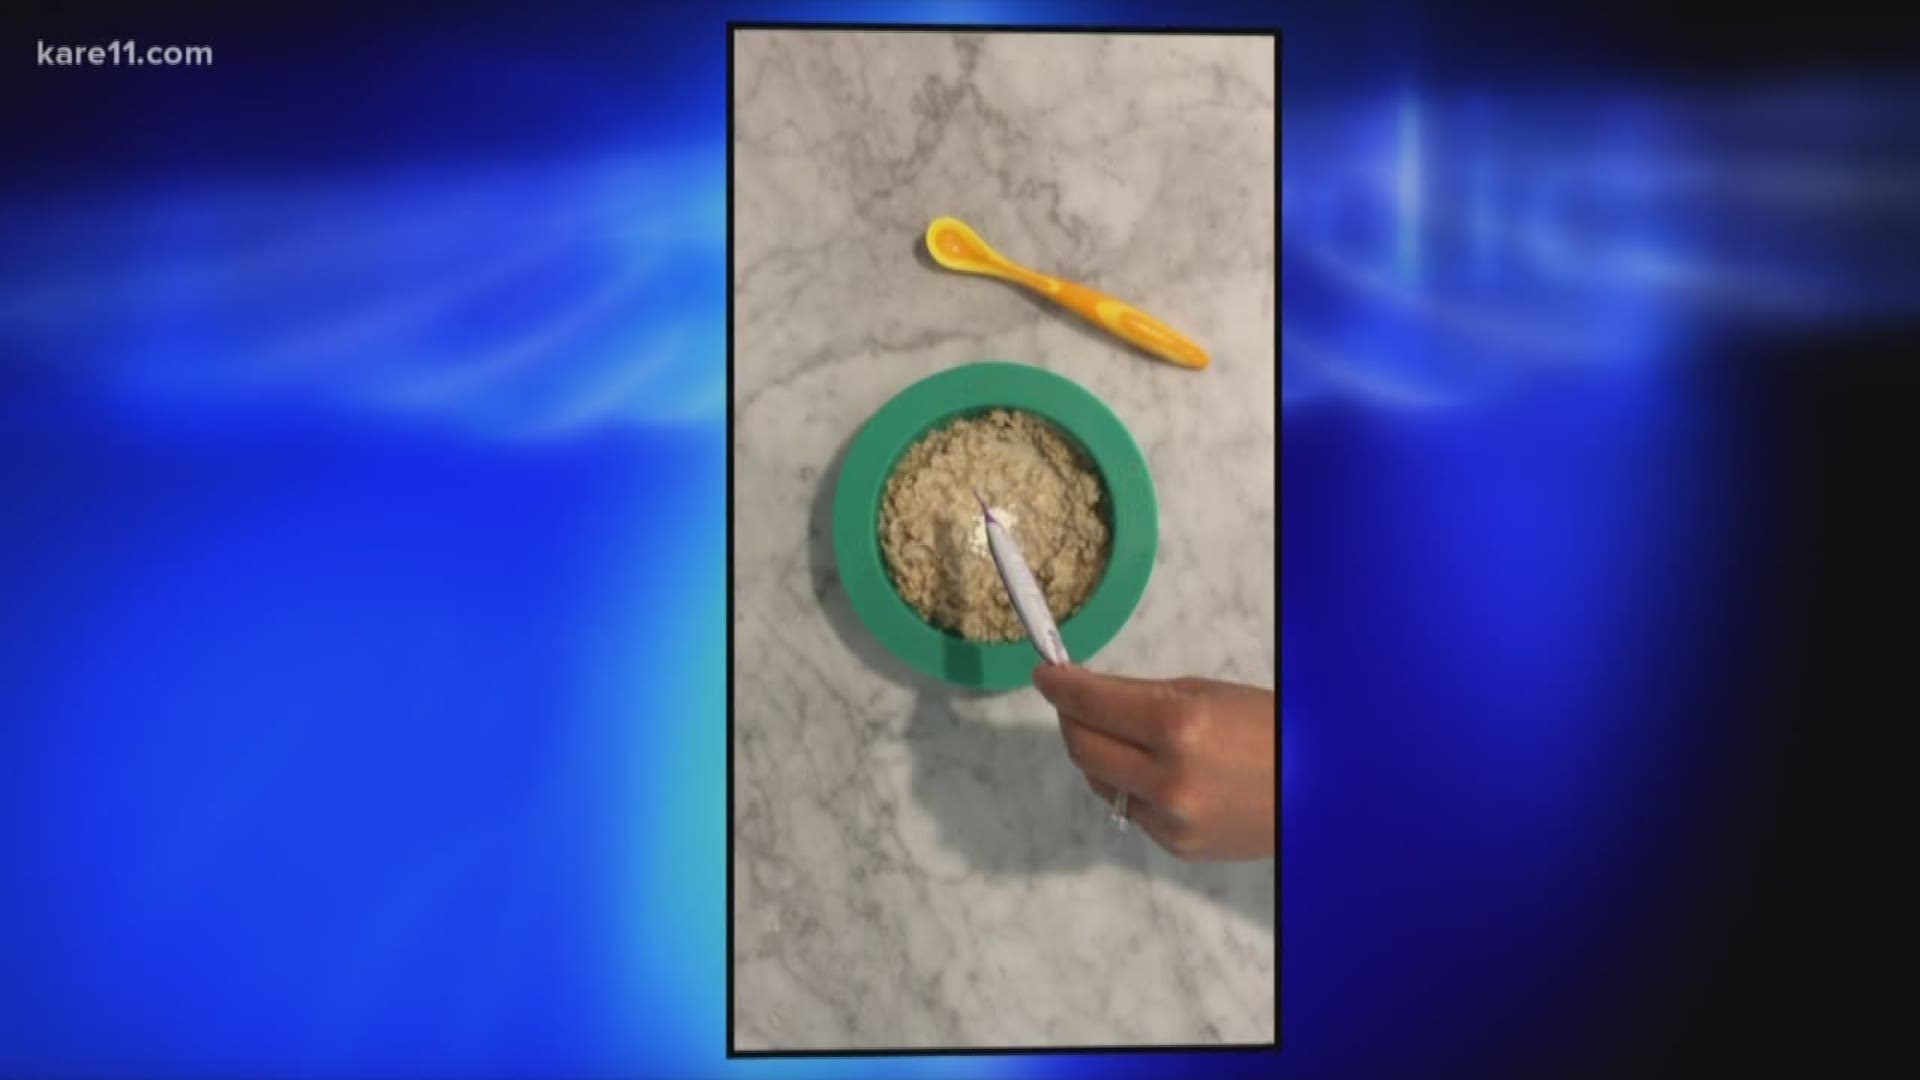 New products, including a powder you can put in a baby's food or bottle, claim to prevent allergies through early introduction. KARE 11's Lauren Leamanczyk talked with a doctor to see if they can really work. https://kare11.tv/2TQCMgE